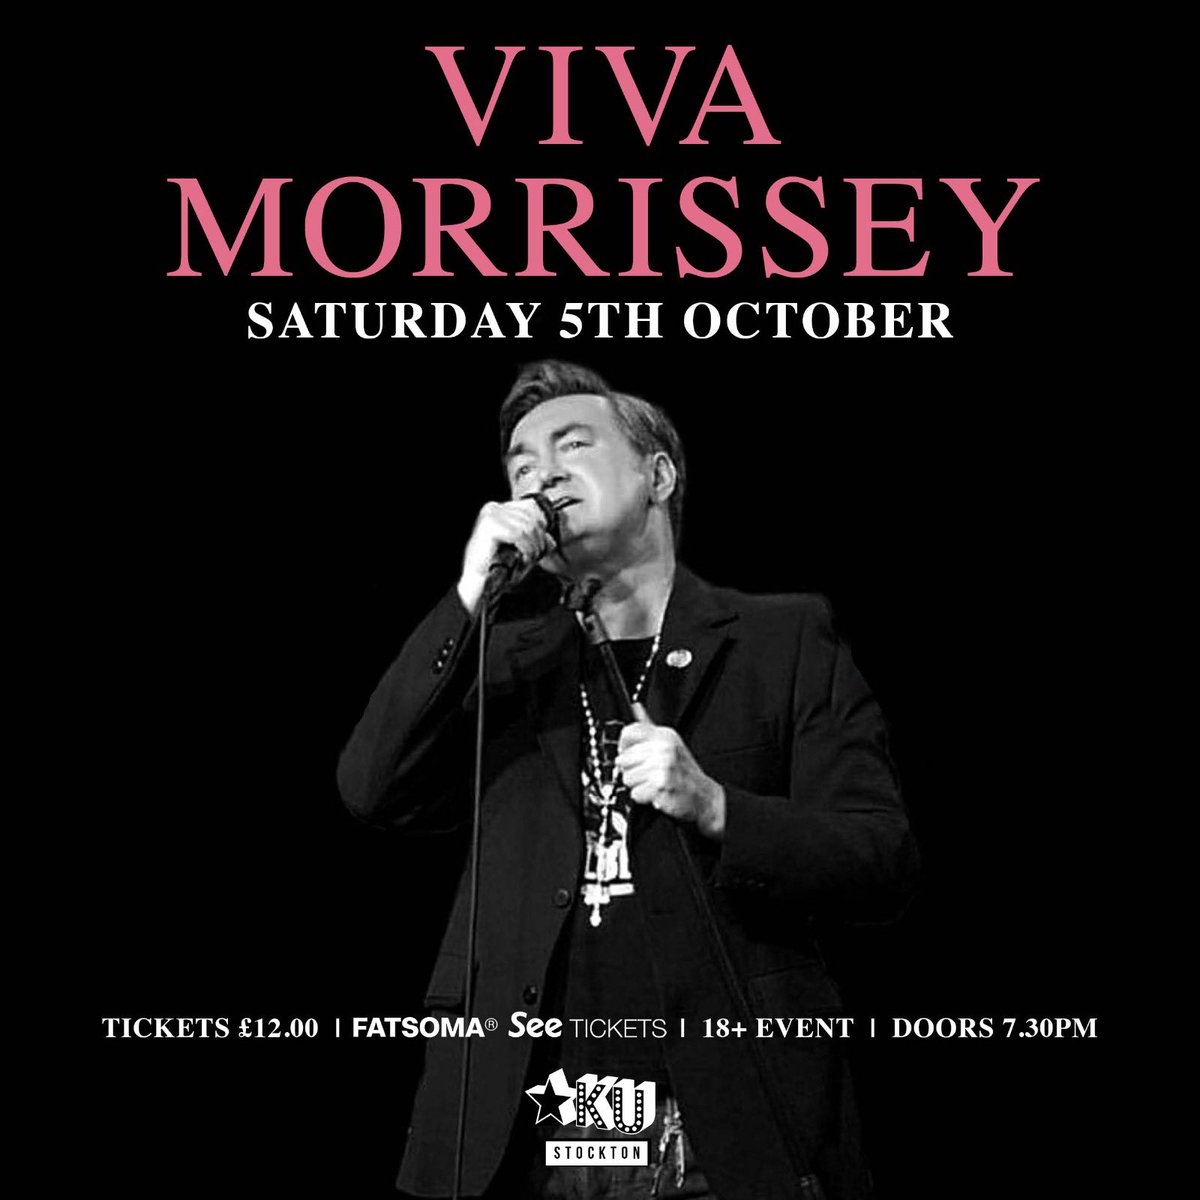 If you’re a fan of Morrissey or The Smiths you can look forward to Viva Morrissey this October 🙌 The full band tribute will be bringing the music of the iconic frontman to the KU stage 🎶 Tickets on sale now ⬇️ 🎫 fatsoma.com/e/bd8vyijy/la/…